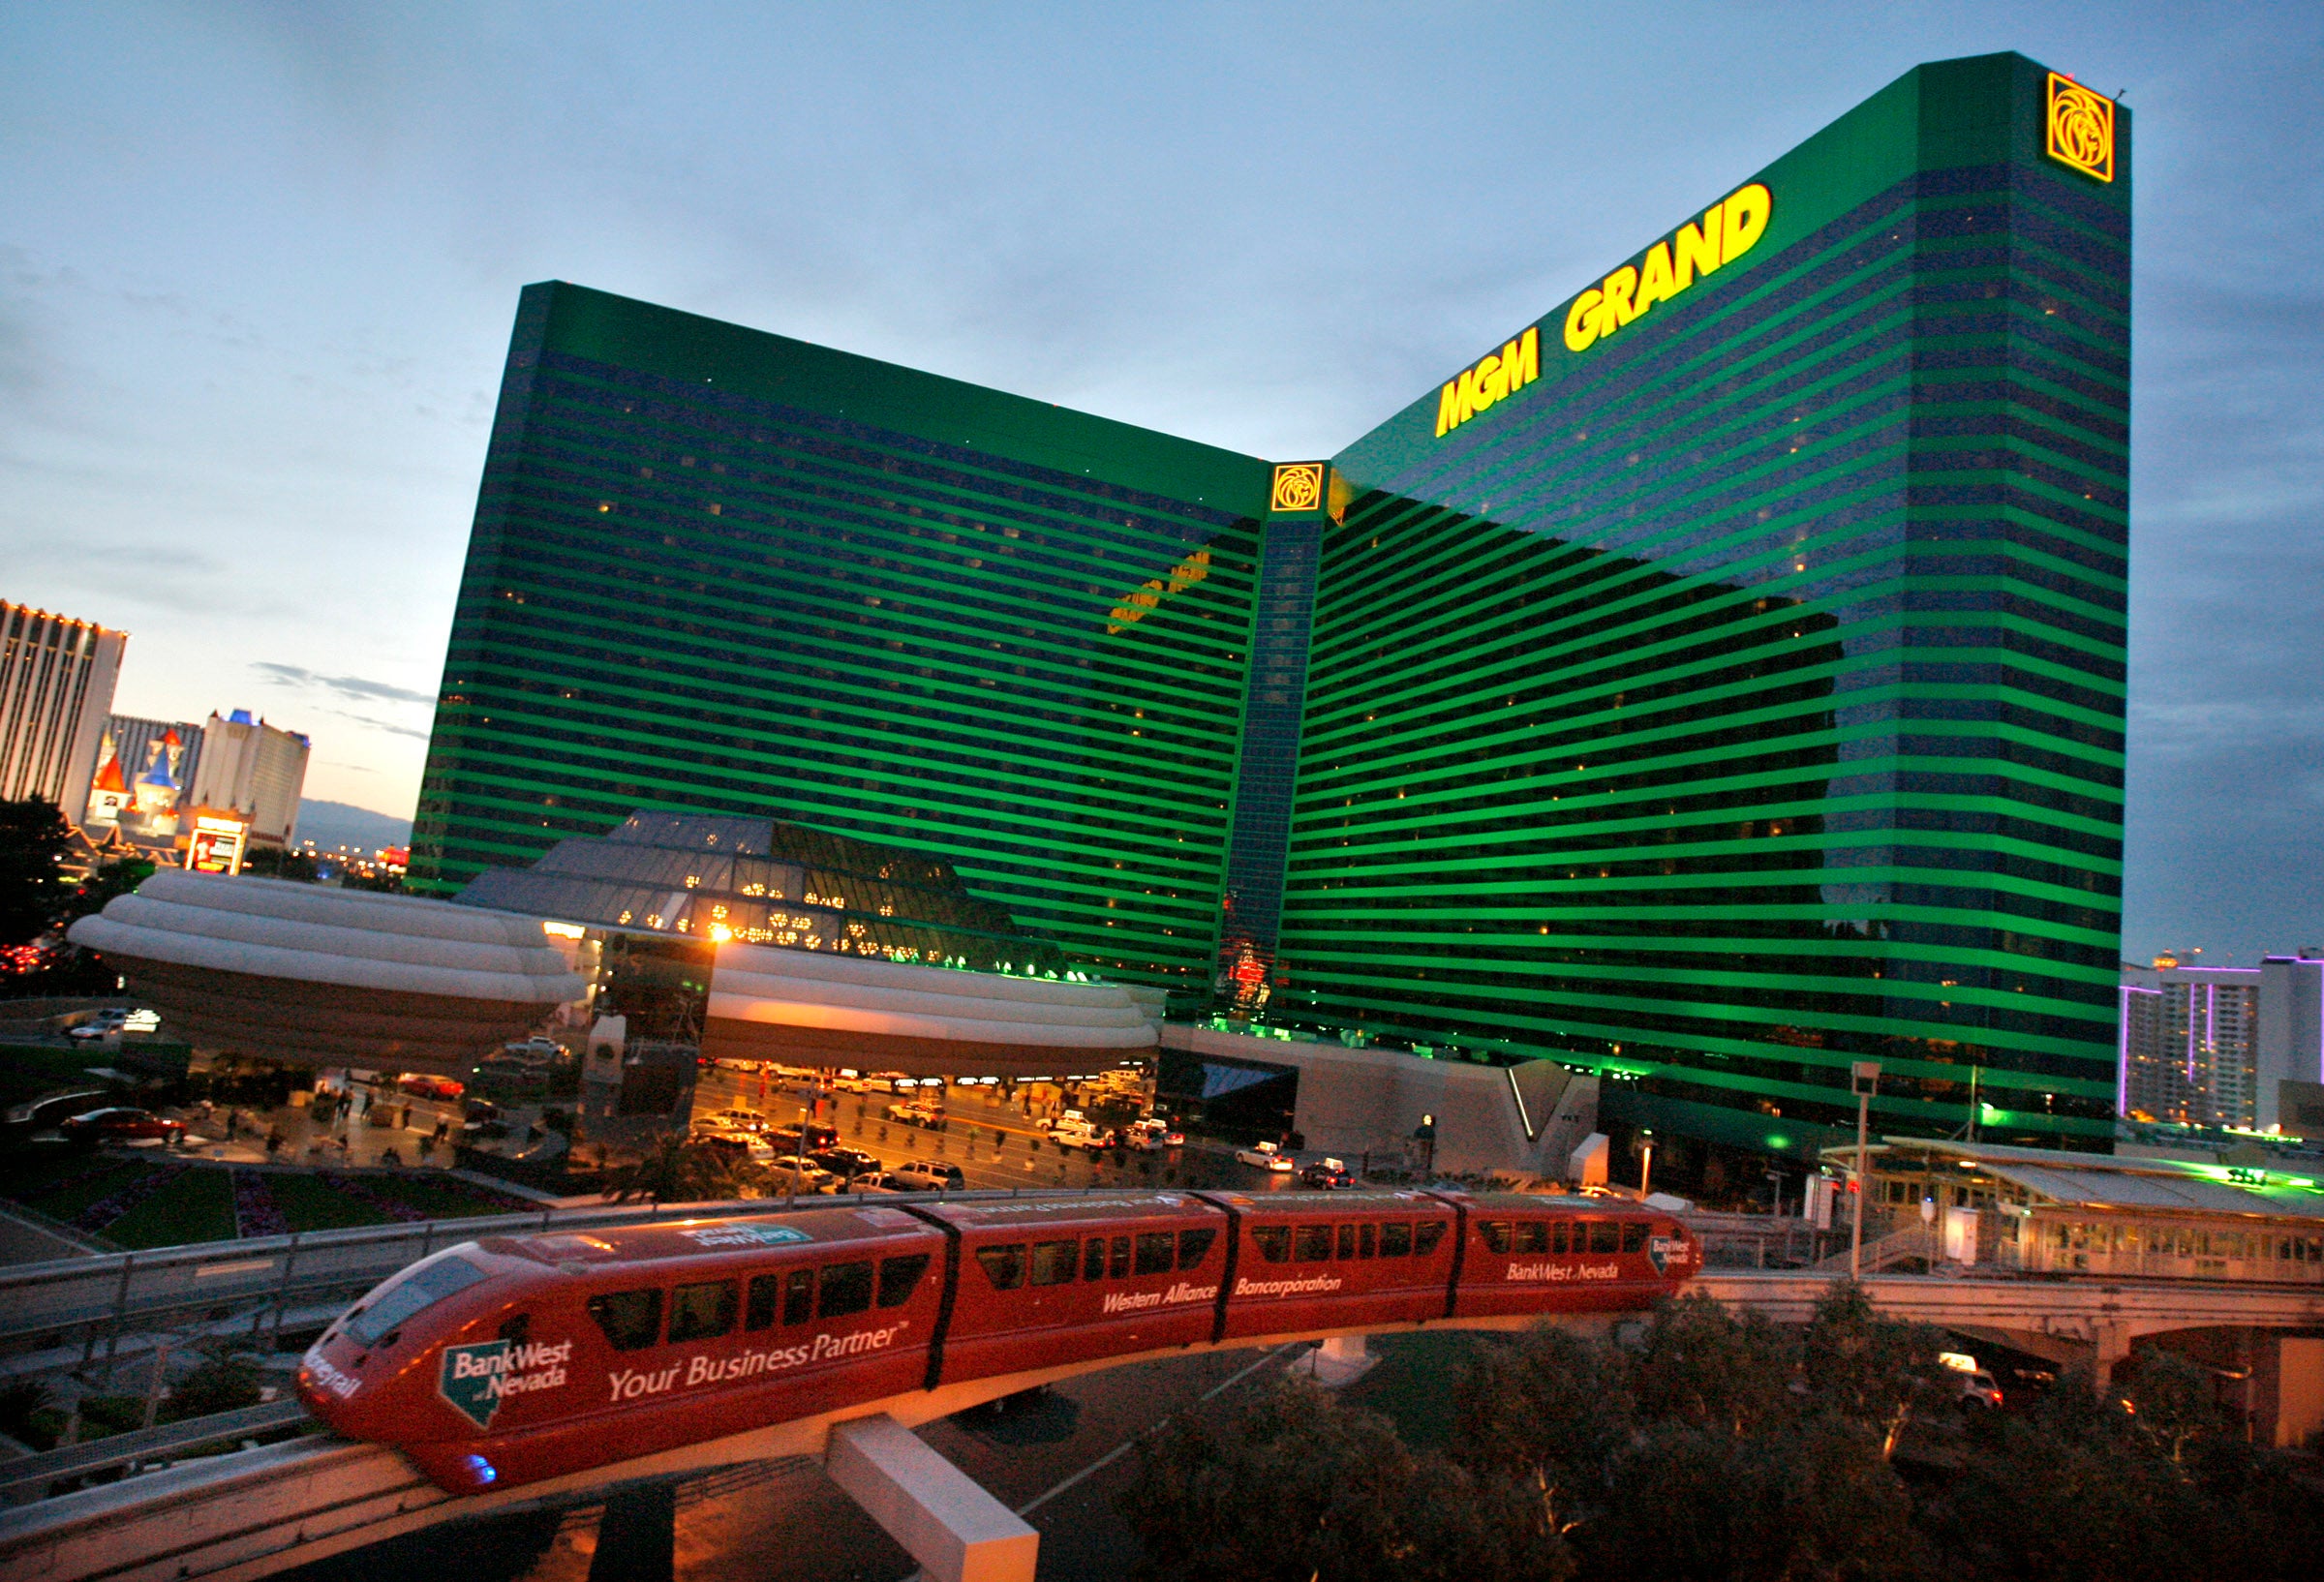 FBI investigates cybersecurity issue at MGM Resorts while casinos and